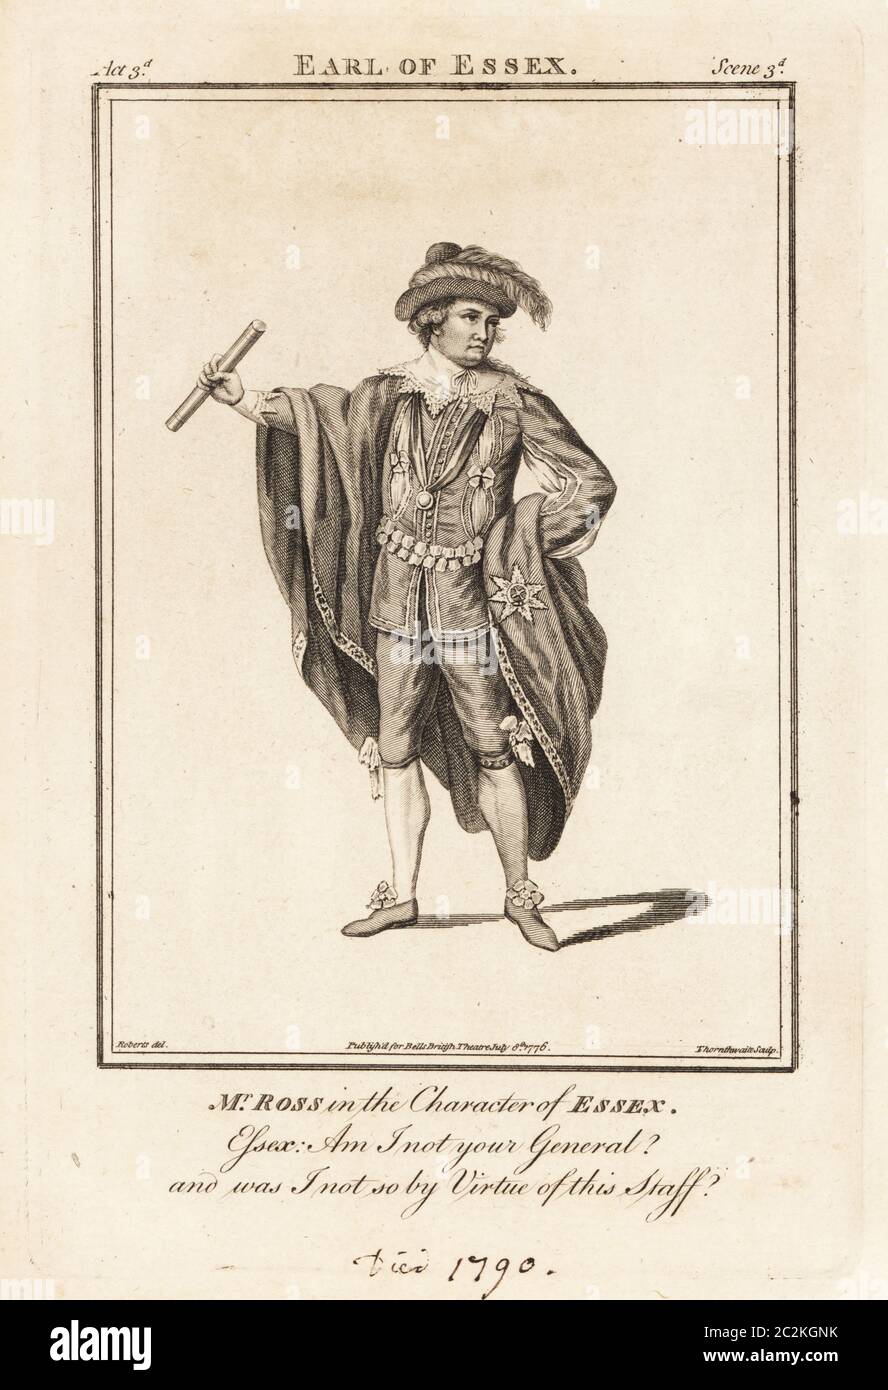 Mr. David Ross in the character of Essex in Henry Jones’ The Earl of Essex, Drury Lane Theatre, 1752. Copperplate engraving by J. Thornthwaite after an illustration by James Roberts from Bell’s British Theatre, Consisting of the most esteemed English Plays, John Bell, London, 1776. Stock Photo